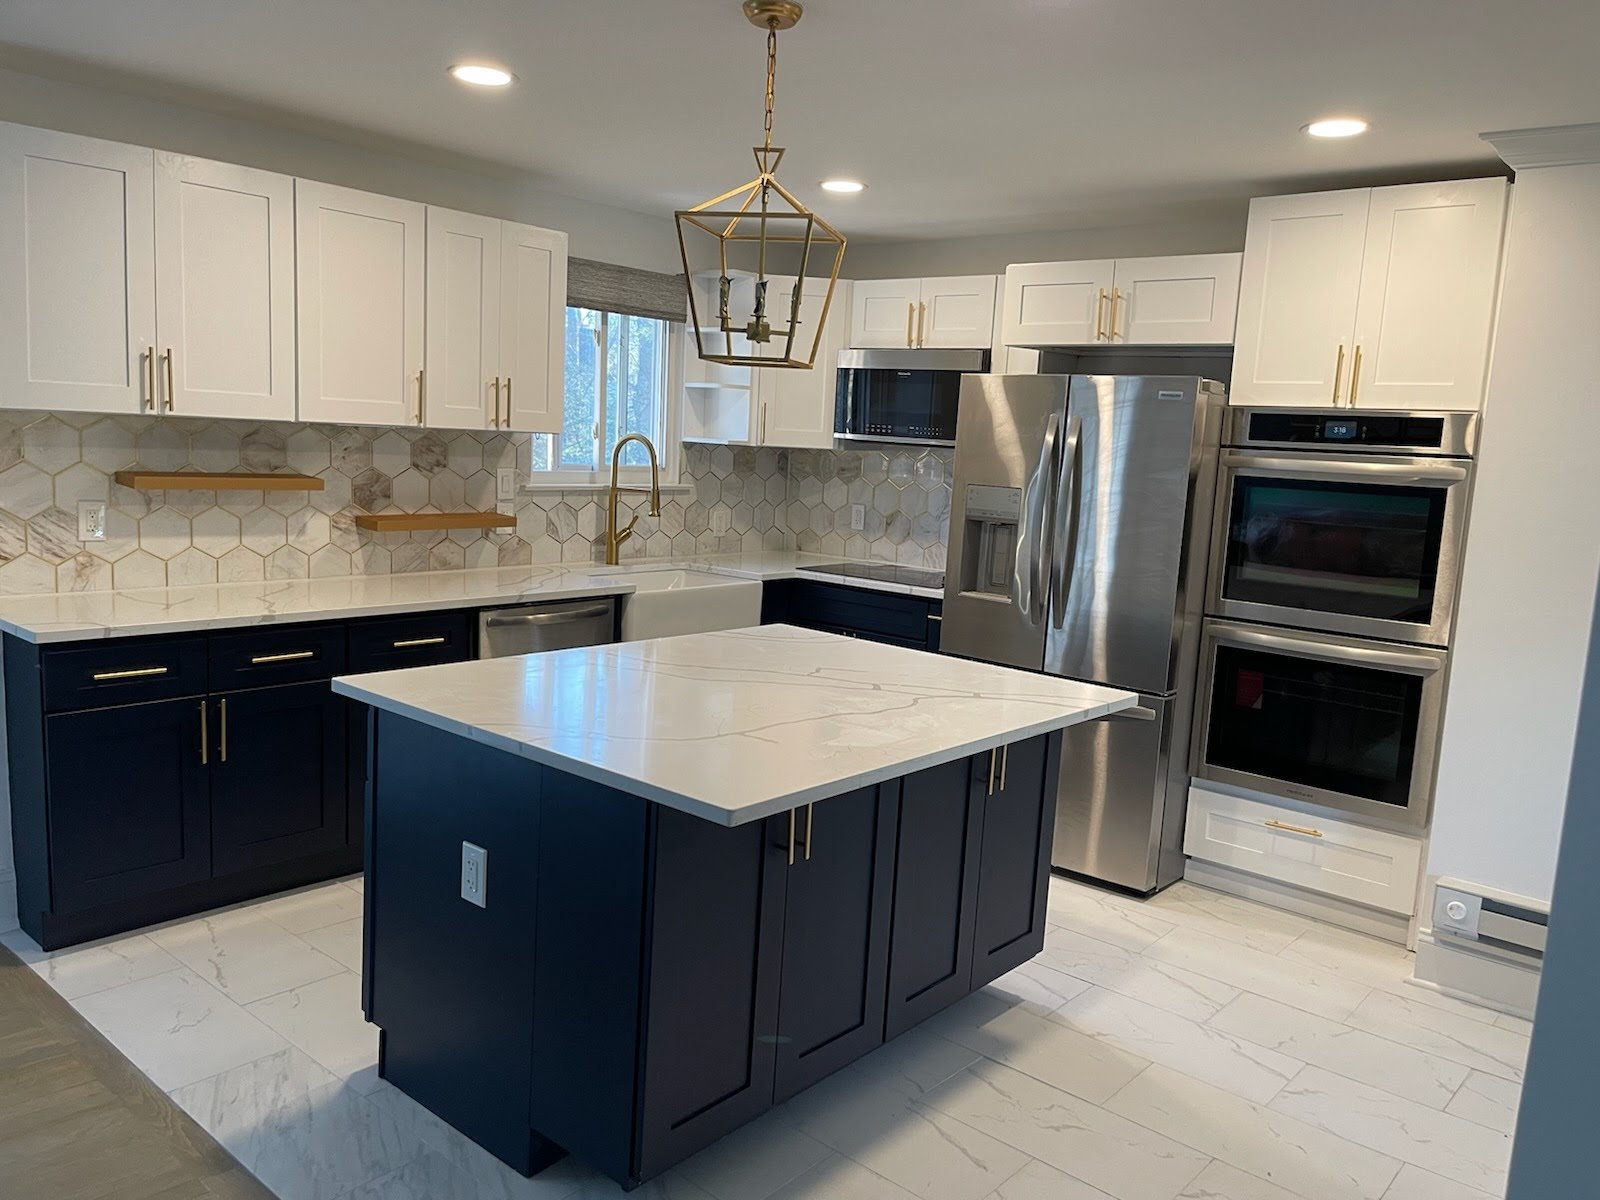 White Shaker and Blue Shaker Cabinets with Calacatta Countertop